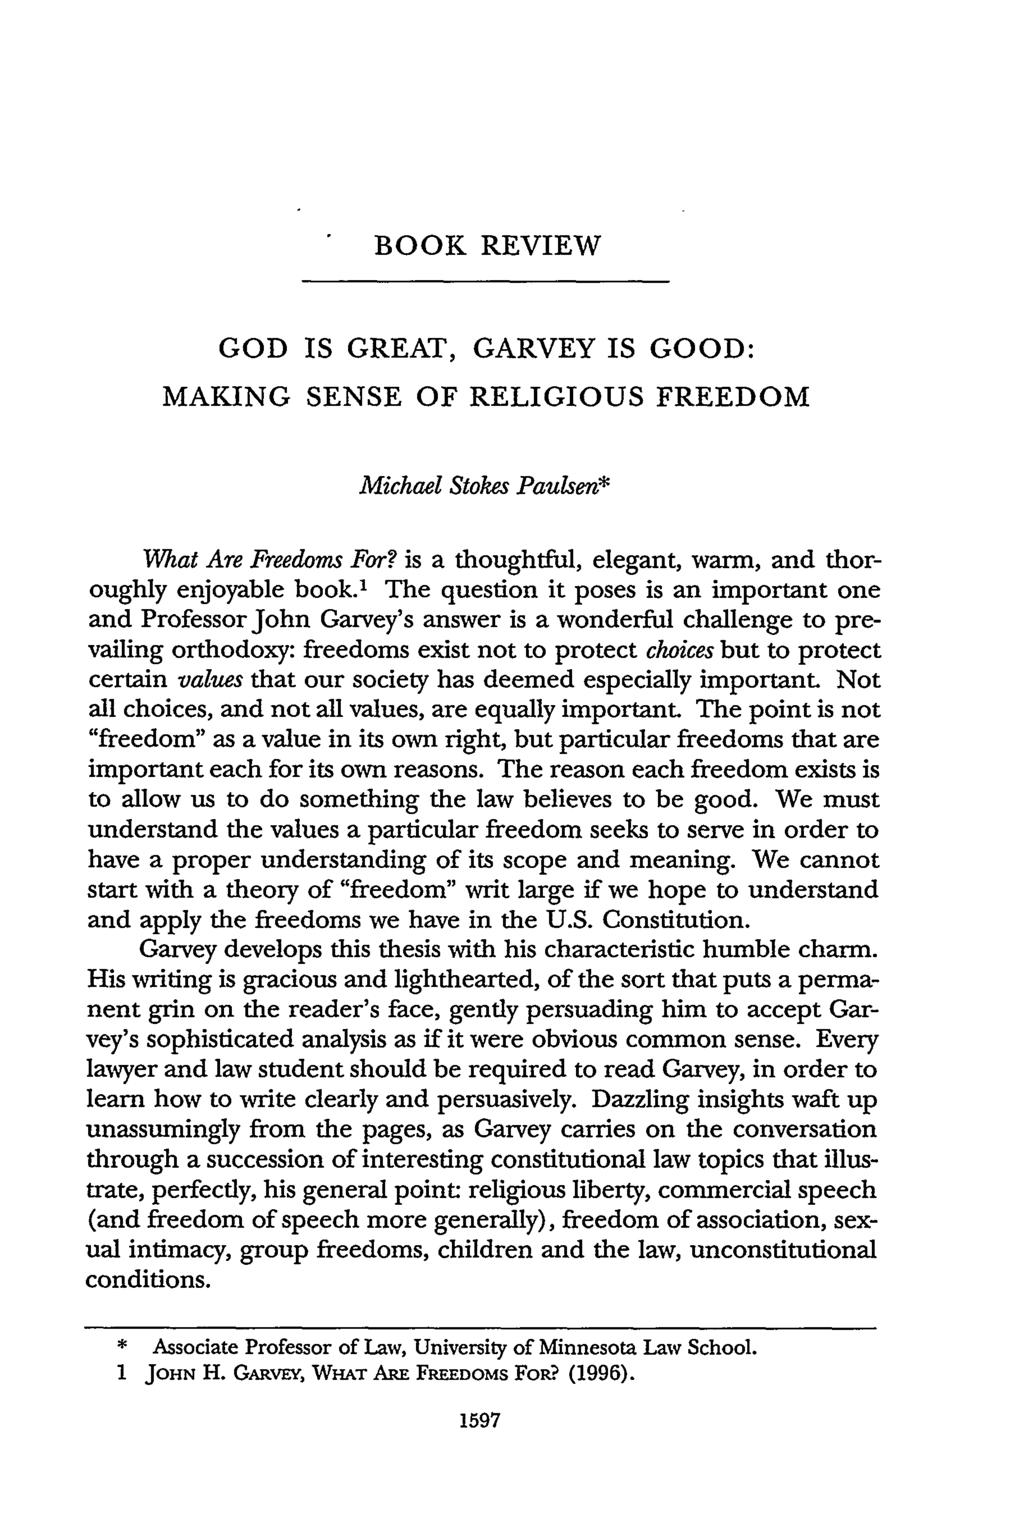 BOOK REVIEW GOD IS GREAT, GARVEY IS GOOD: MAKING SENSE OF RELIGIOUS FREEDOM Michael Stokes Paulsen* What Are Freedoms For? is a thoughtful, elegant, warm, and thoroughly enjoyable book.